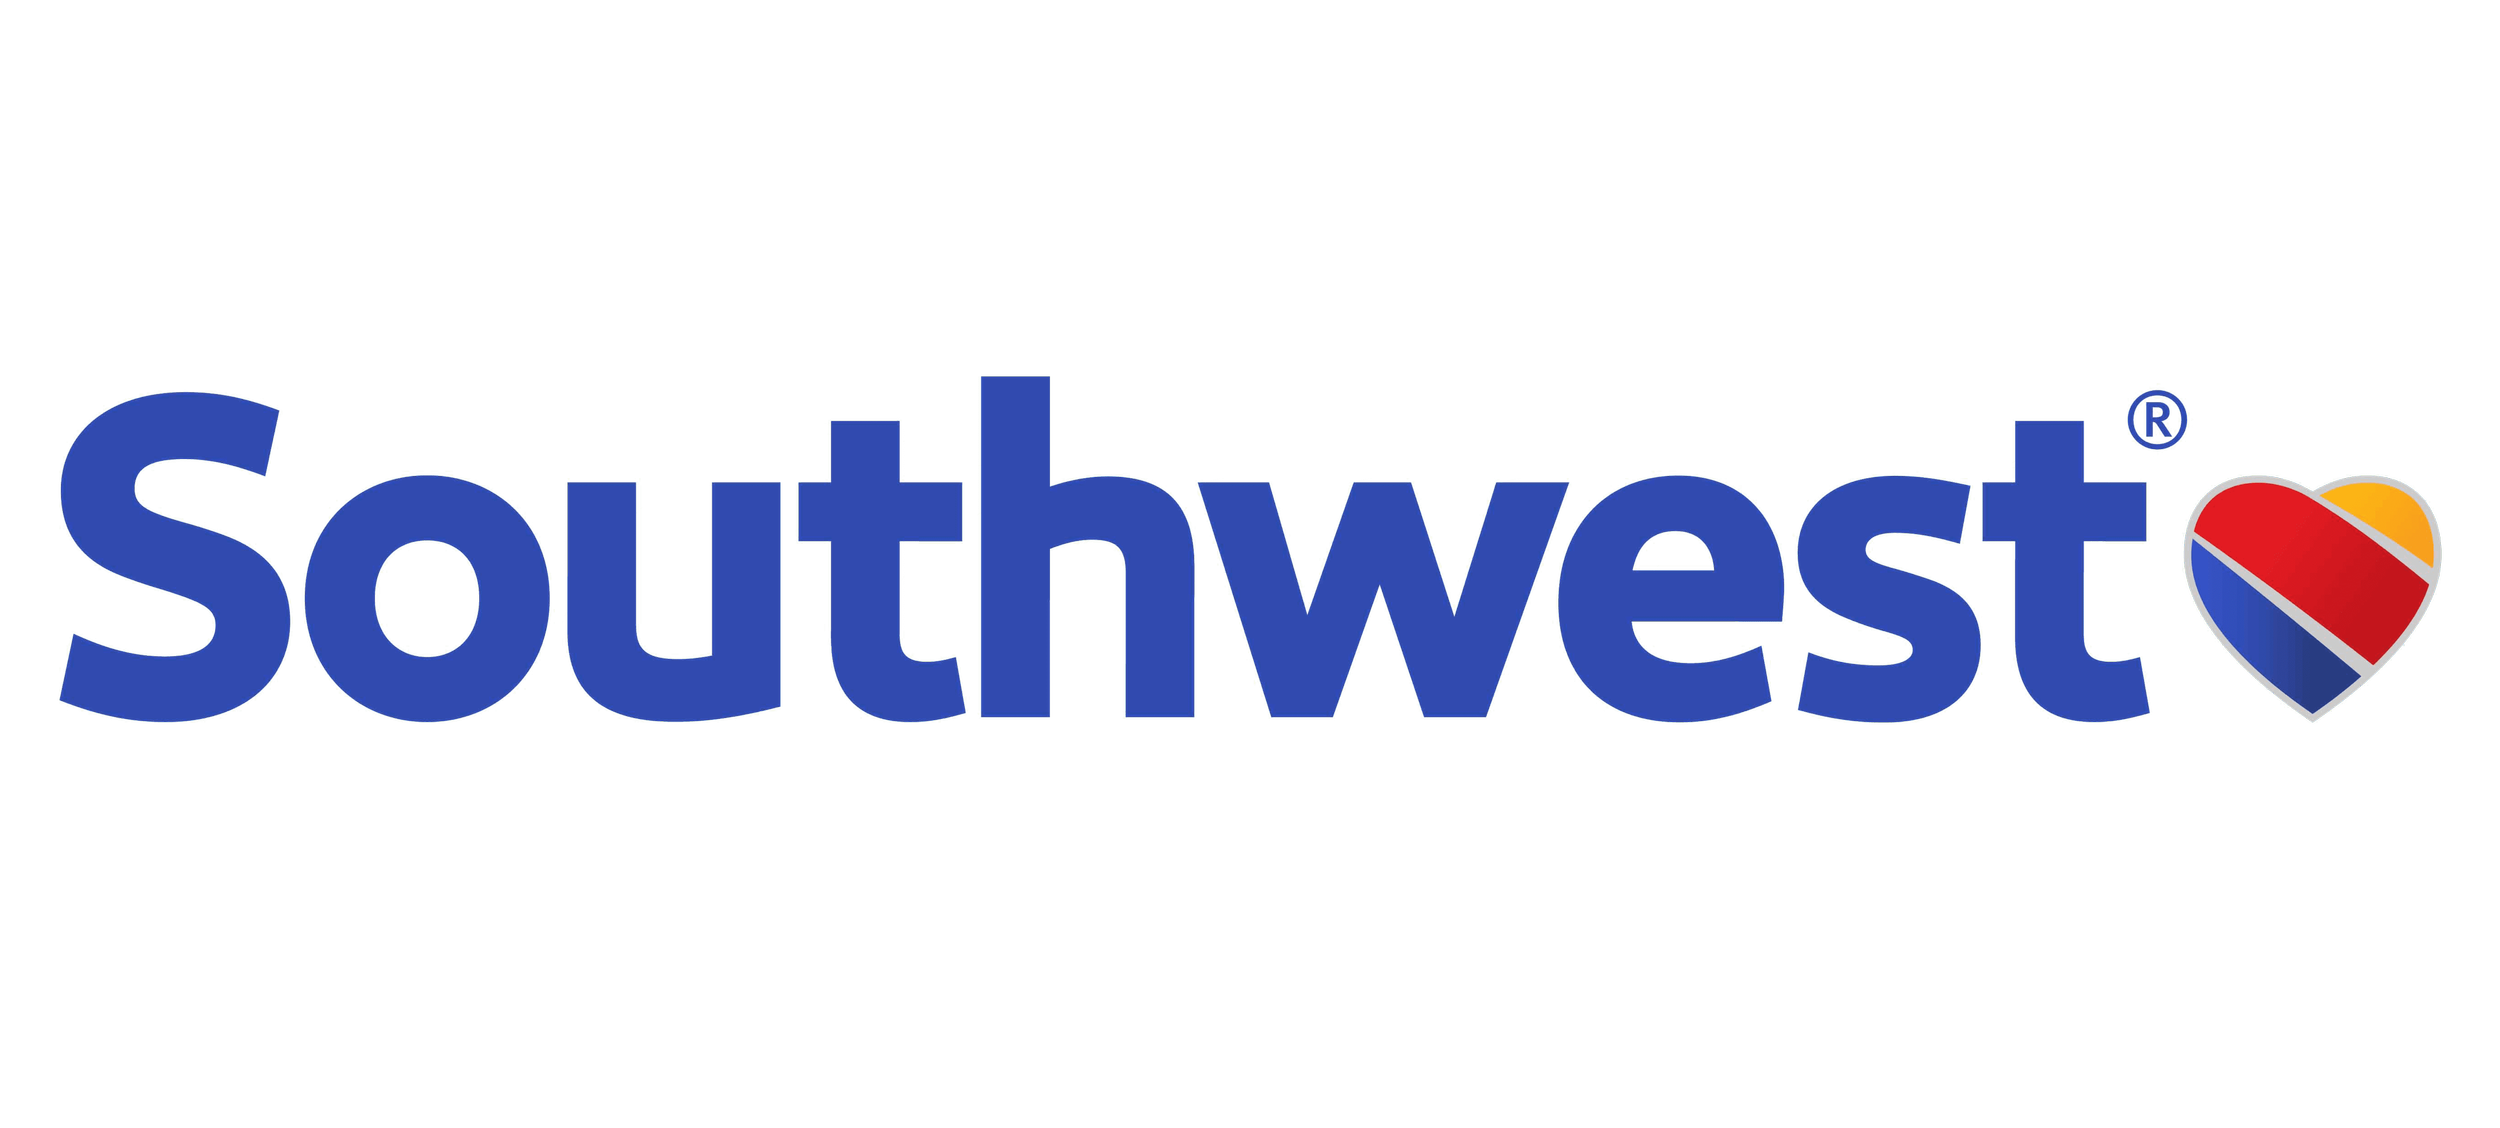 southwest-airlines-logo.png